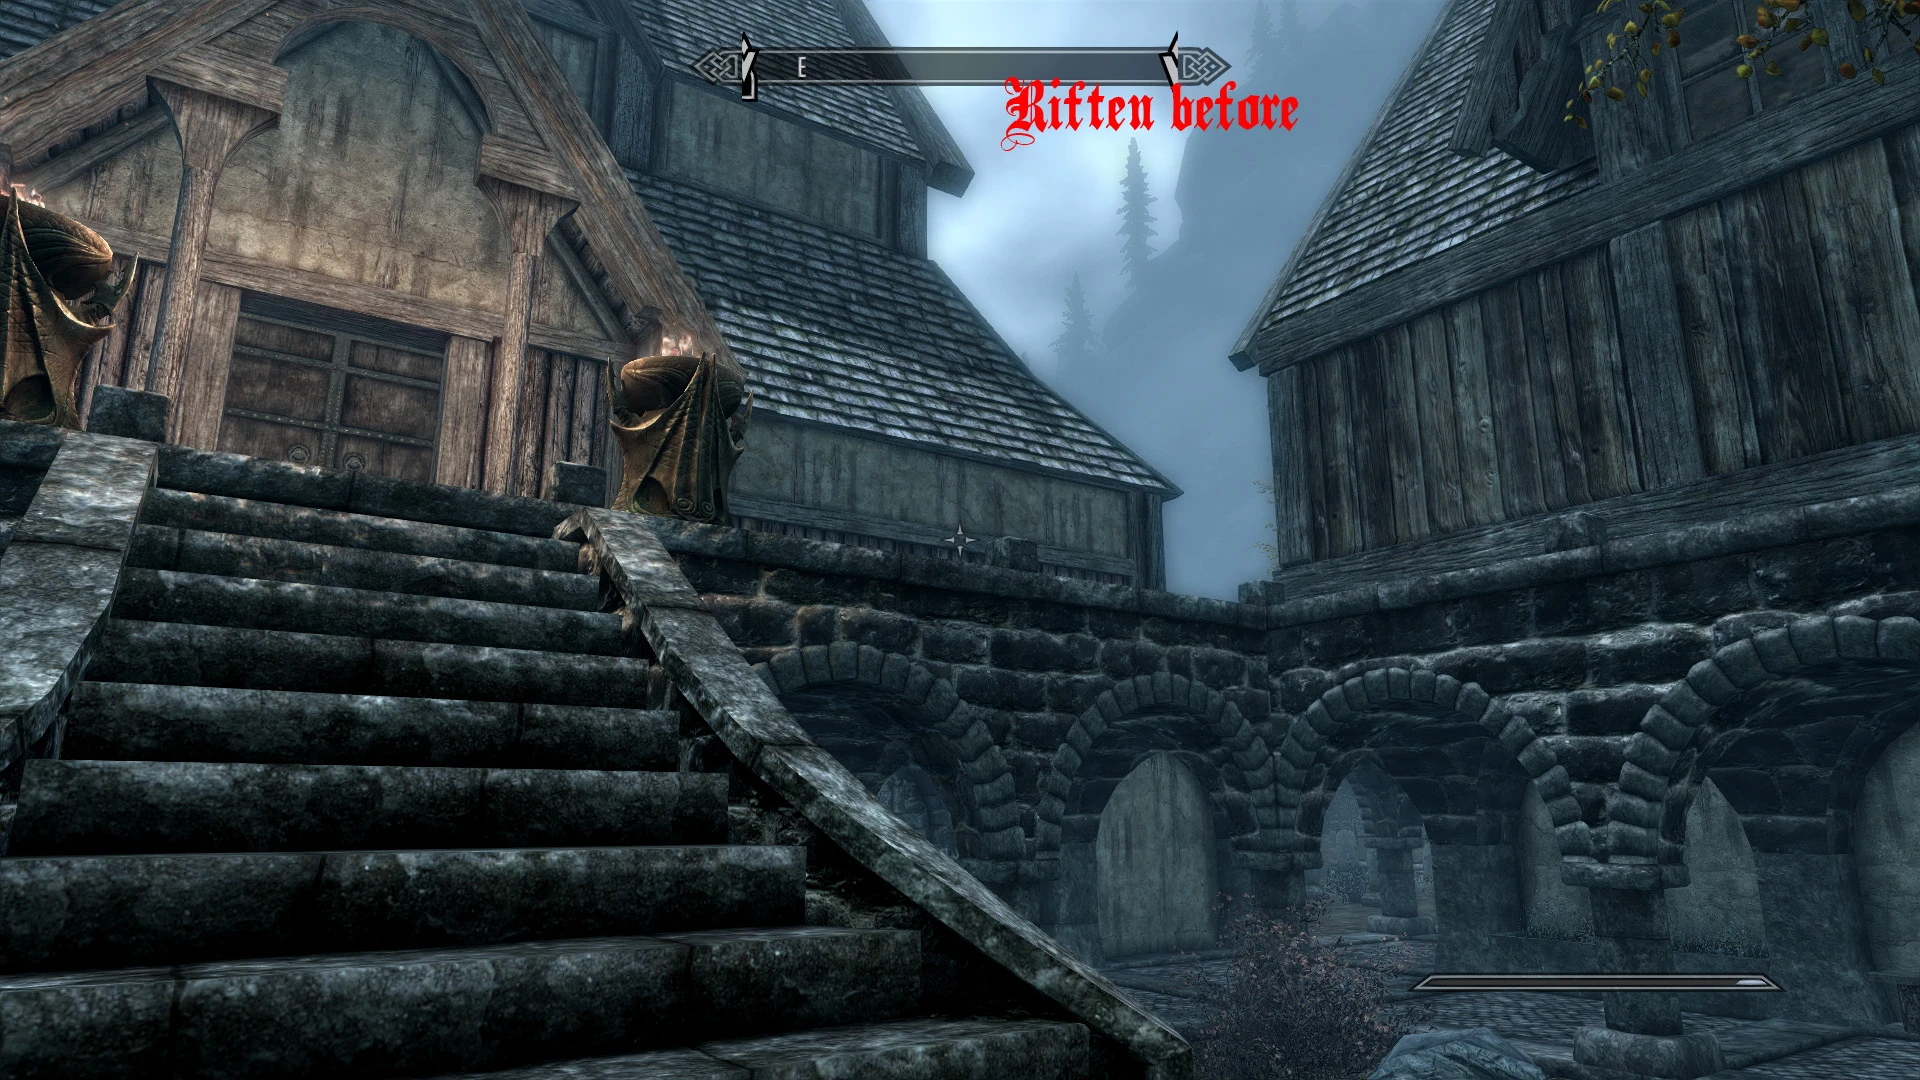 skyrim texture mods for low end pc